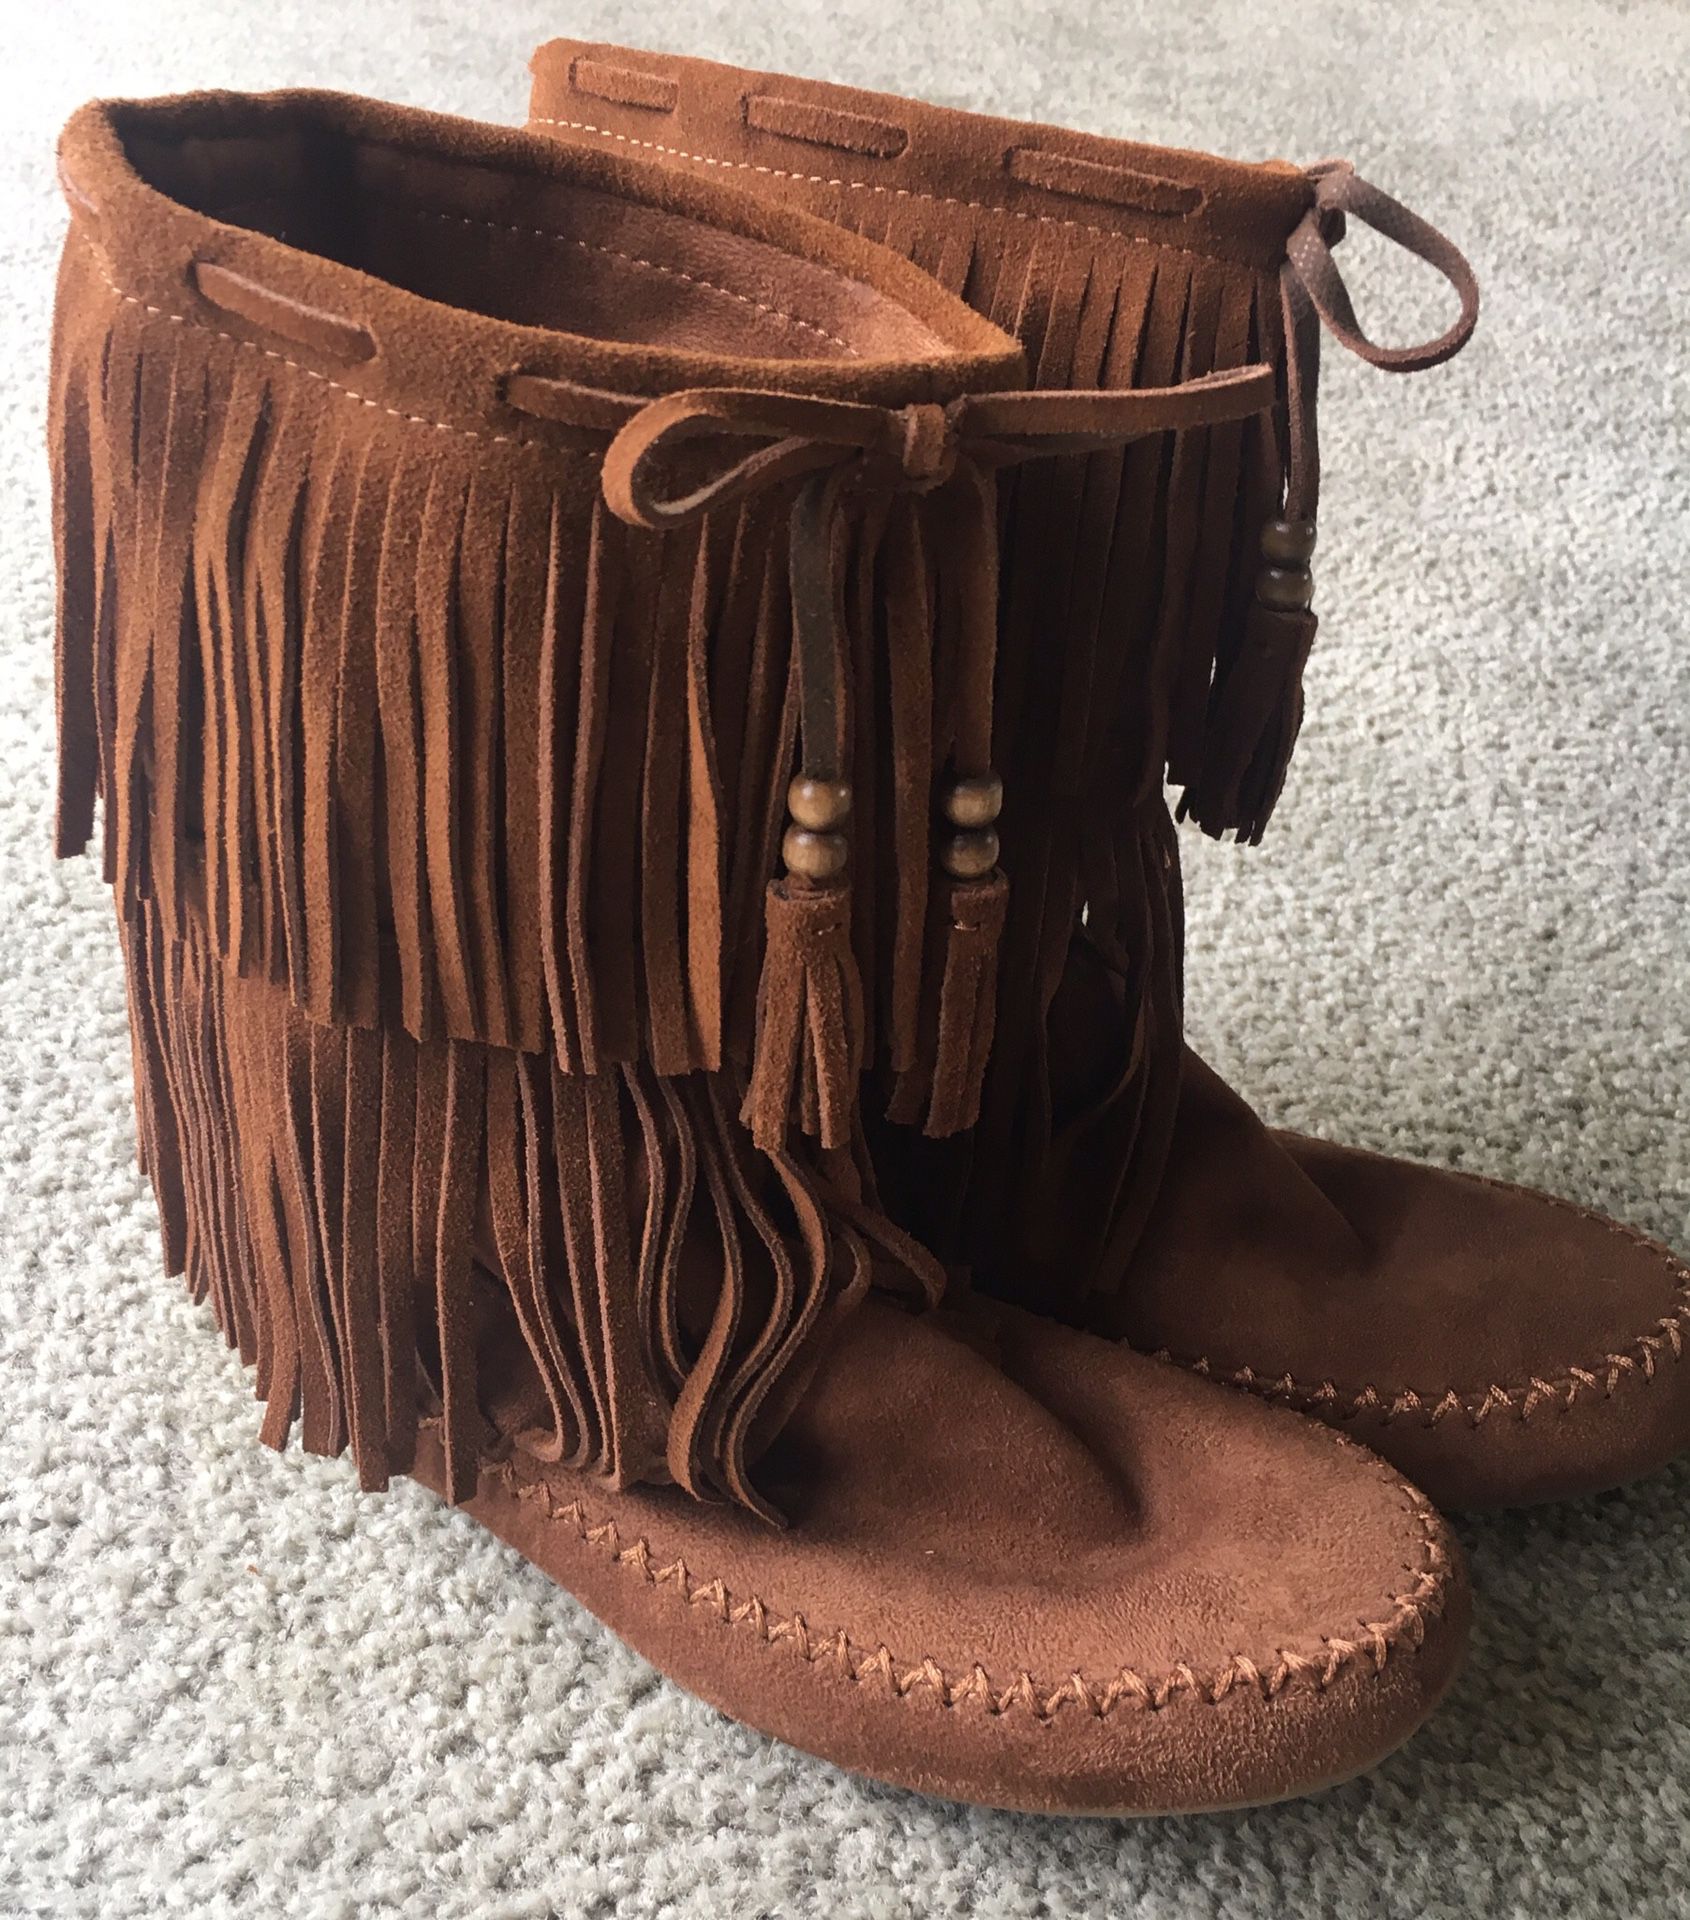 New Fringe Suede Boots